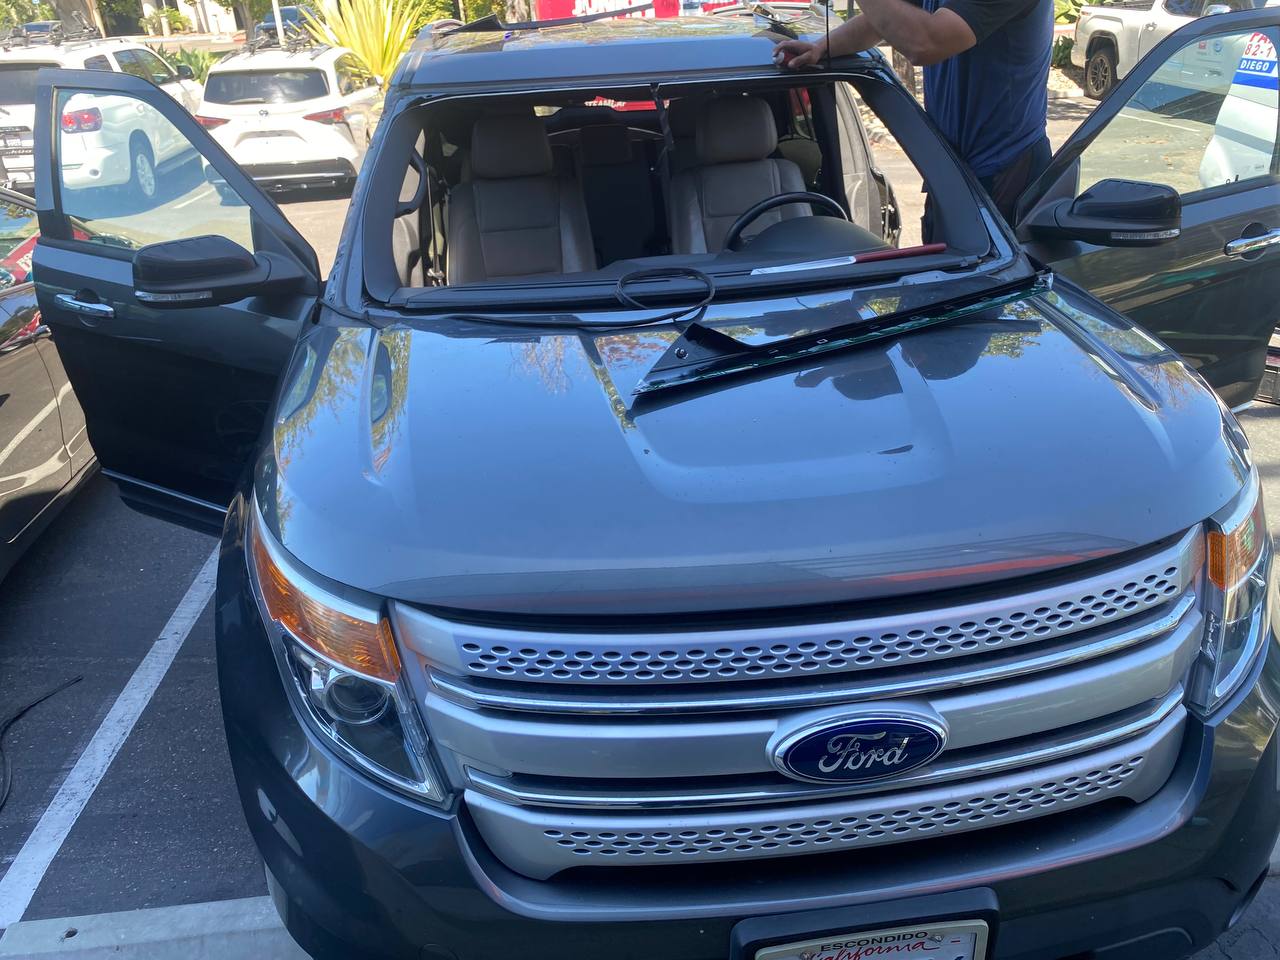 SUV Car - Ford Windshield replacement